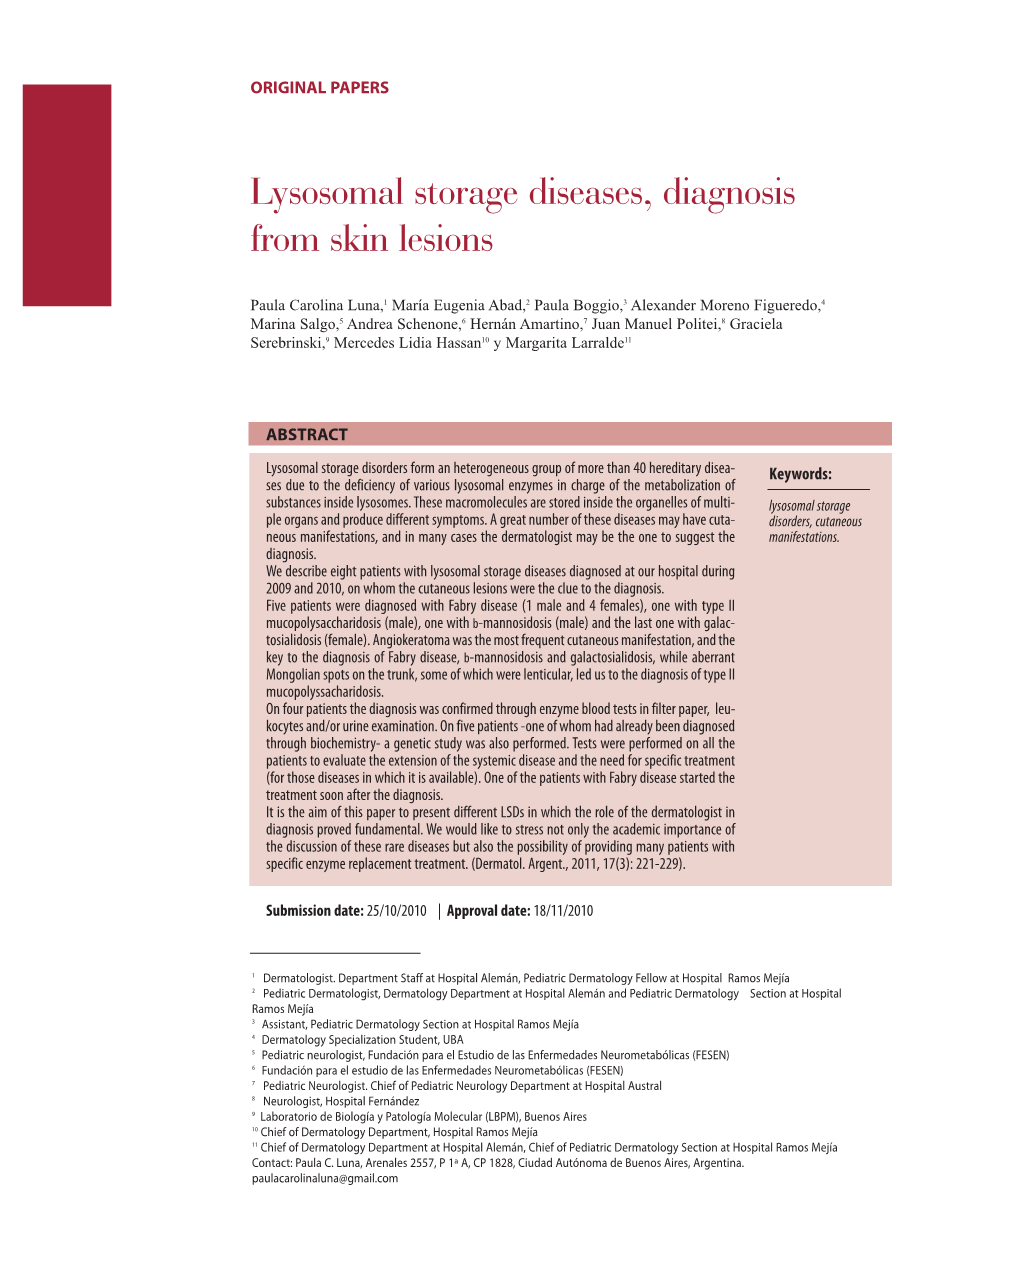 Lysosomal Storage Diseases, Diagnosis from Skin Lesions